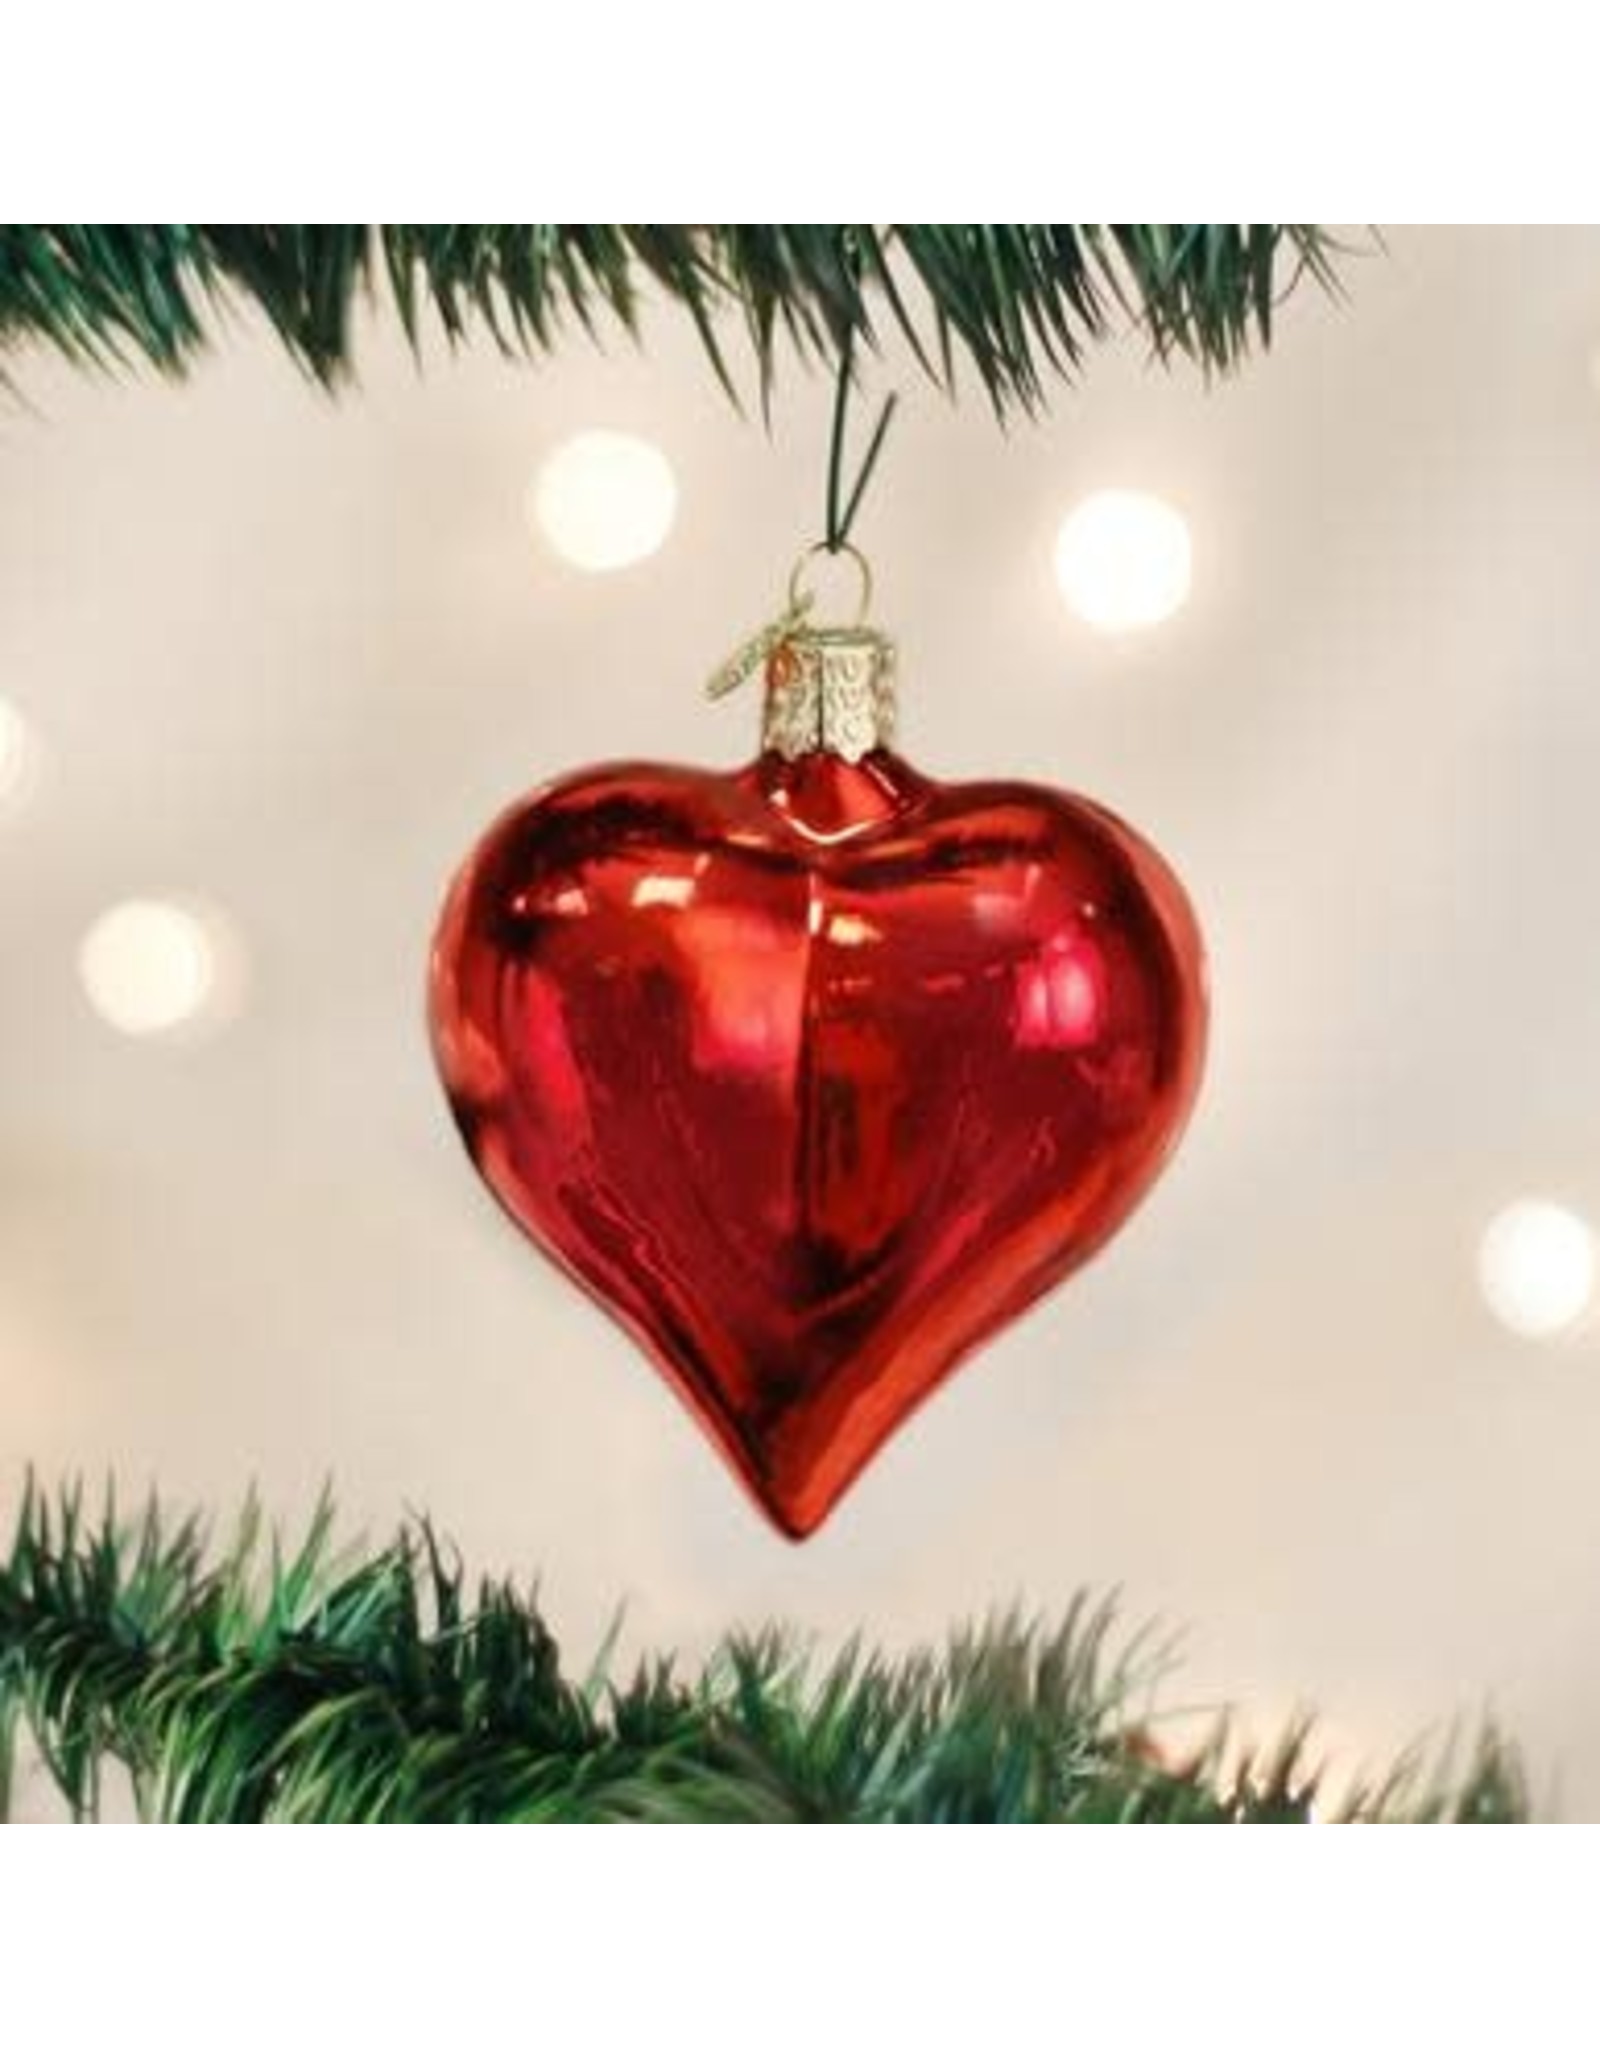 OLD WORLD CHRISTMAS LARGE SHINY RED HEART